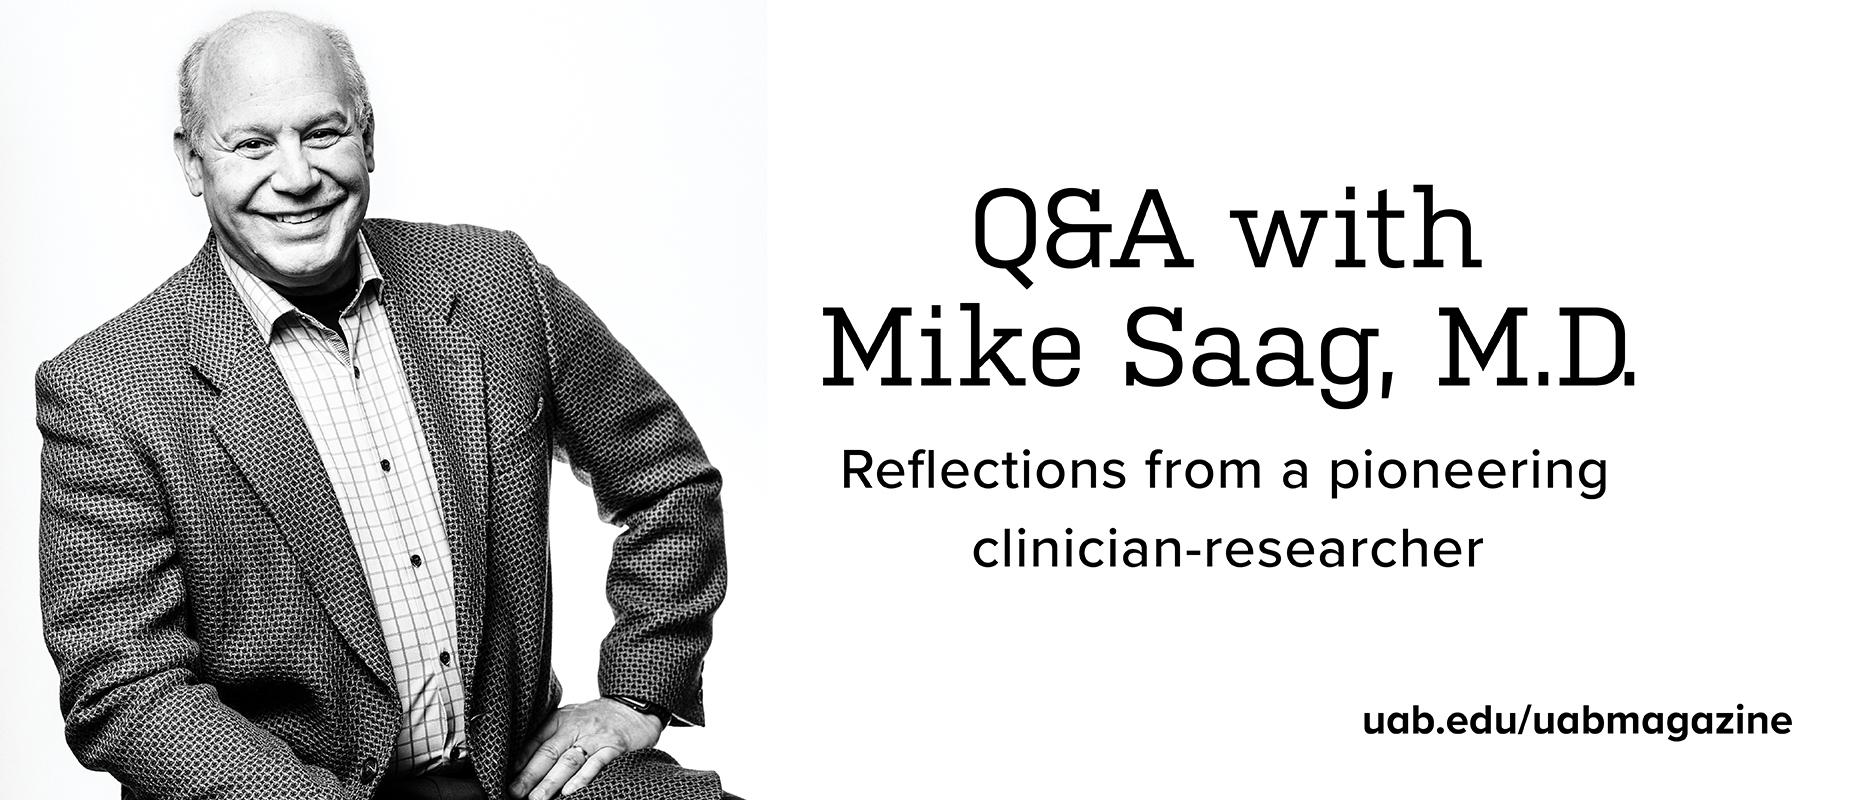 Q&A with Mike Saag, M.D.: Reflections from a pioneering clinician-researcher